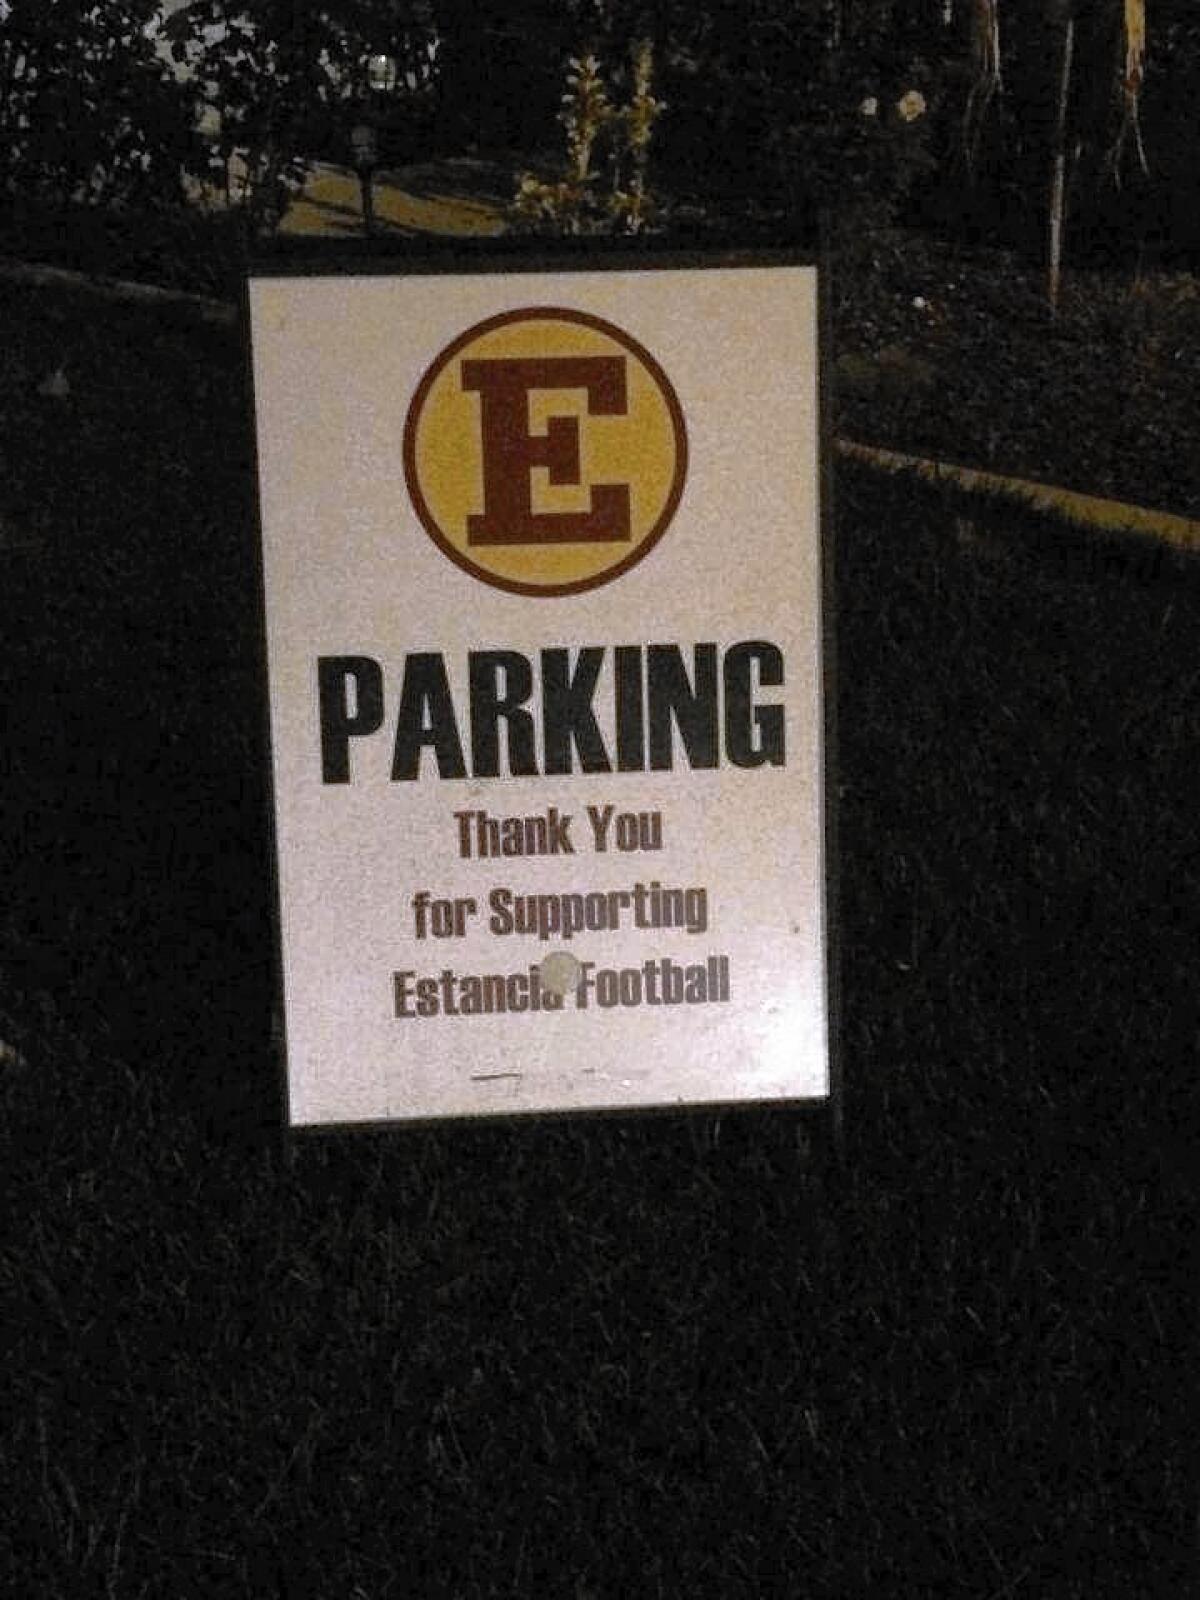 Costa Mesa police have arrested four students, two from Costa Mesa High School, in connection to an Oct. 17 vandalism against Mesa football Coach Glen Fisher's house. The suspects left behind this Estancia High School parking sign at Fisher's house and threw eggs at the residence.